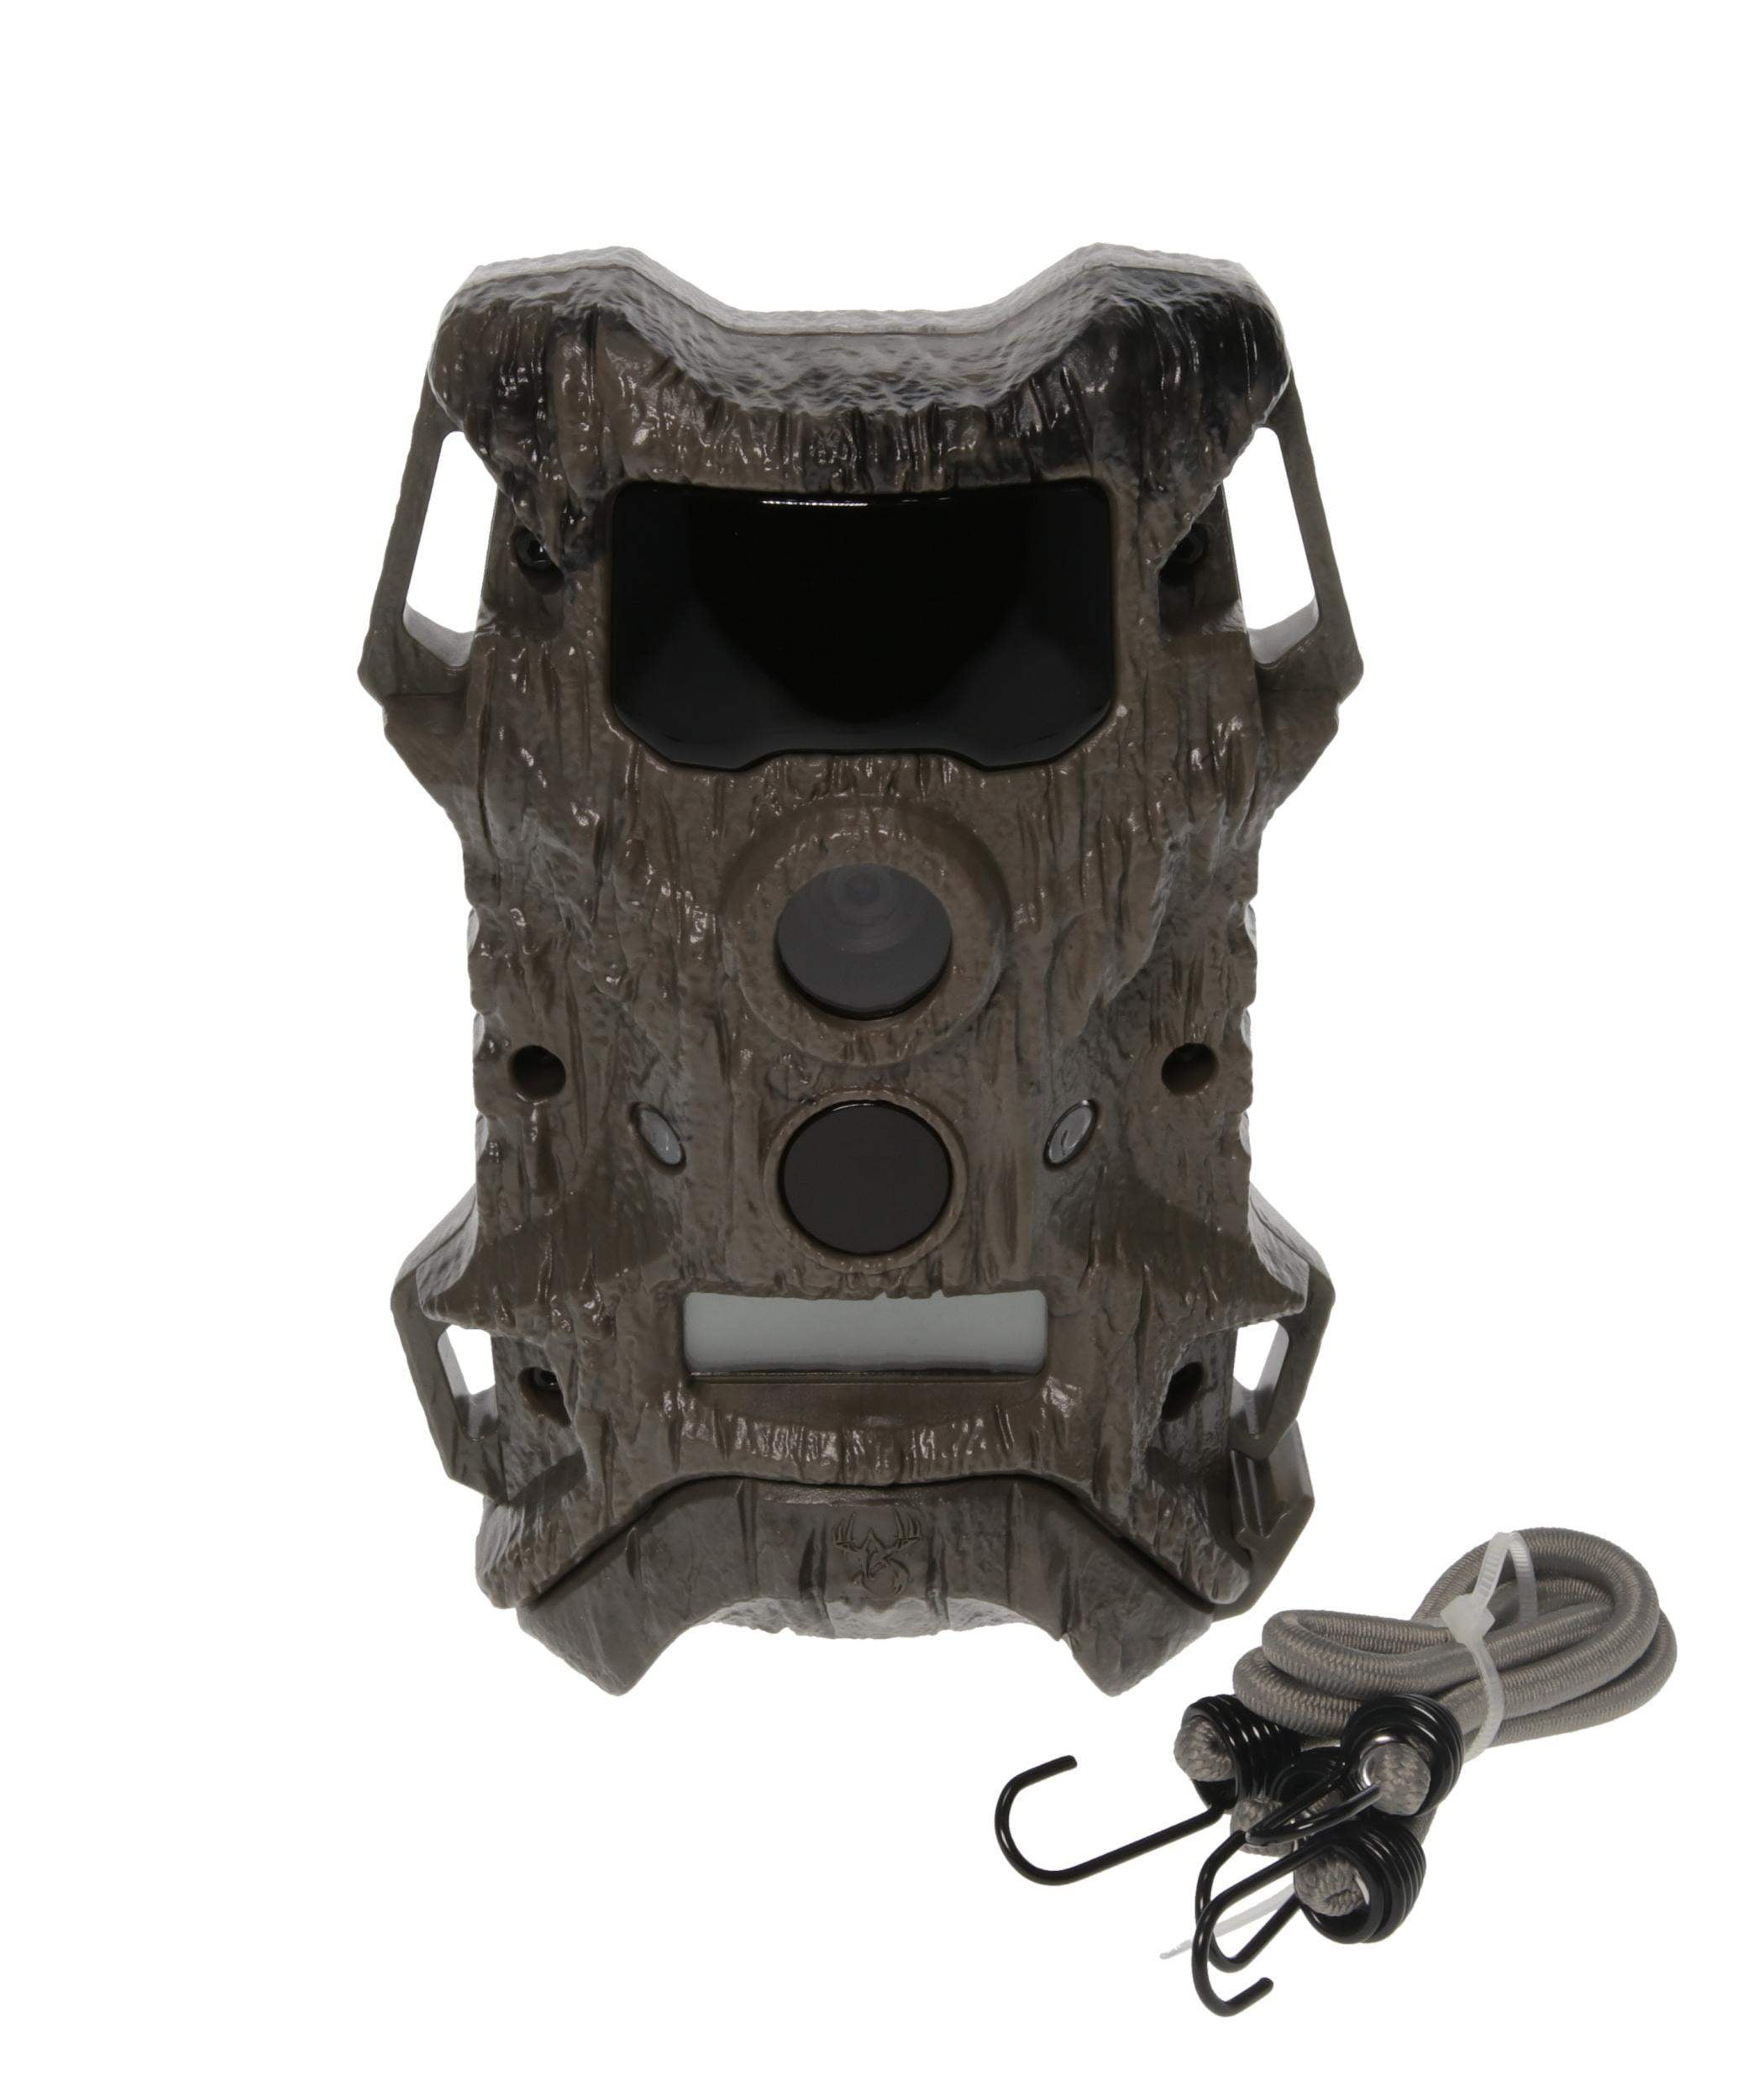 Wildgame Innovations Terra 10 Lightsout Trail Cam Scouting Stealth Camera 